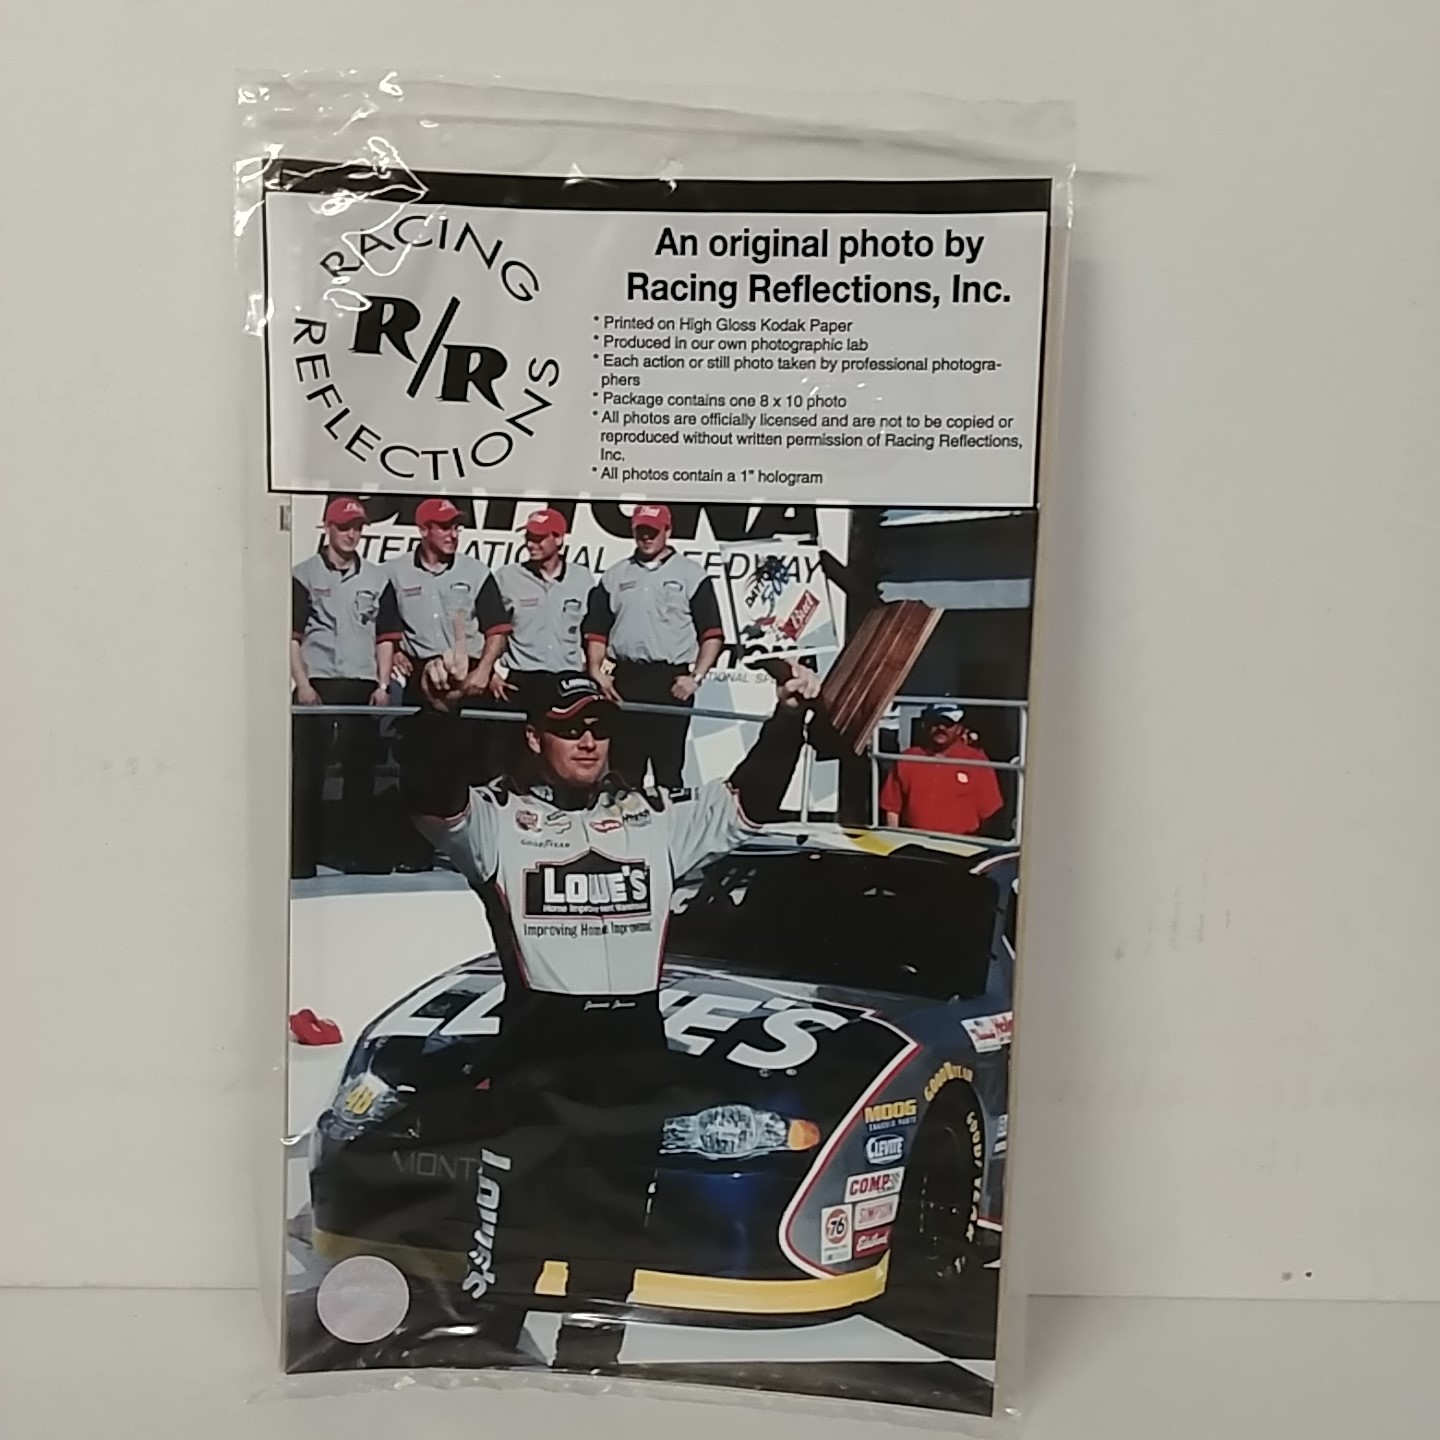 2002 Jimmie Johnson Lowe's "Holding Trophy" Racing Reflections Photo